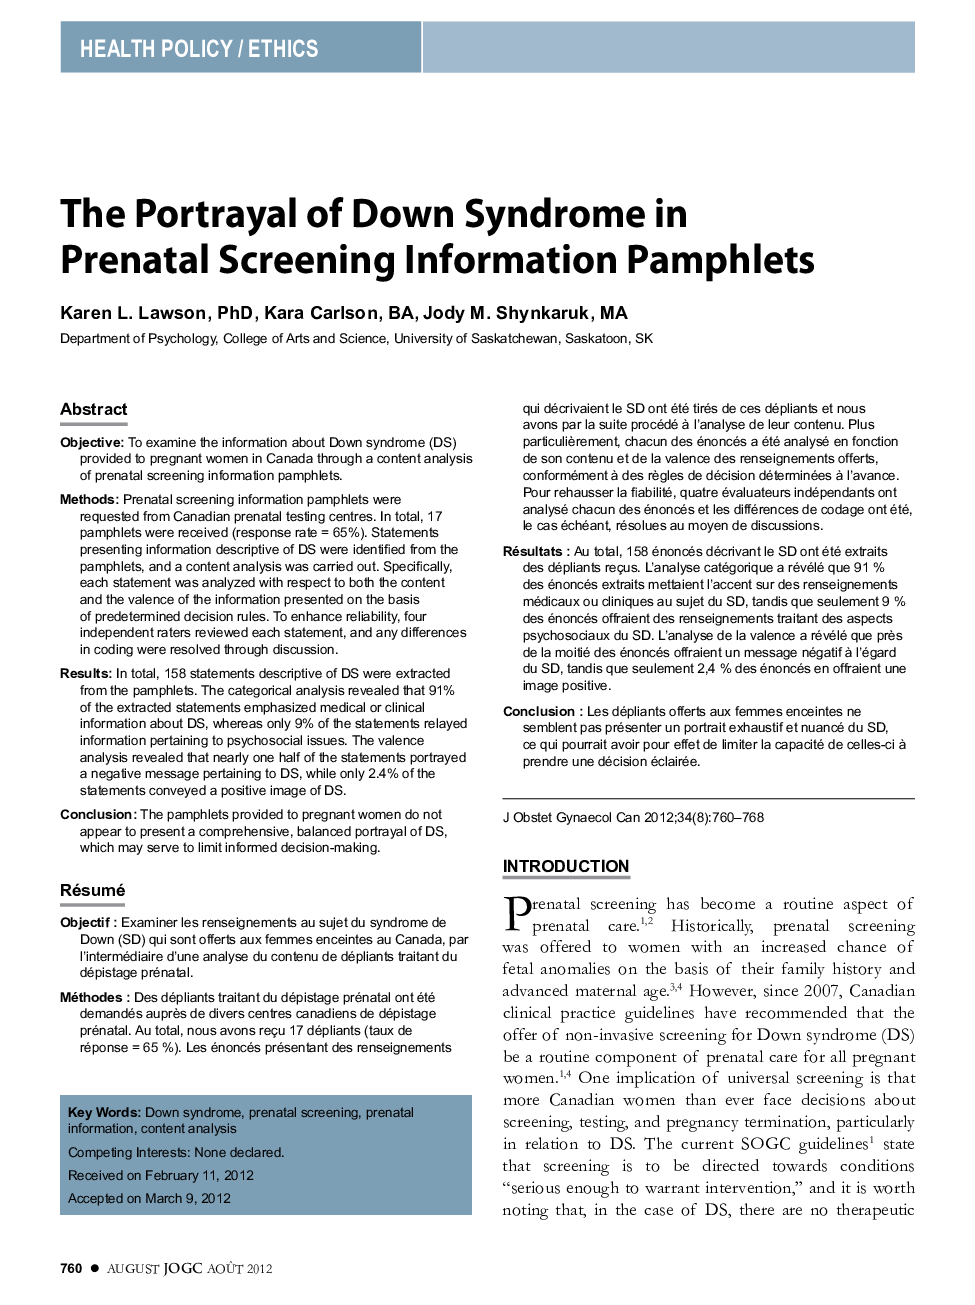 The Portrayal of Down Syndrome in Prenatal Screening Information Pamphlets